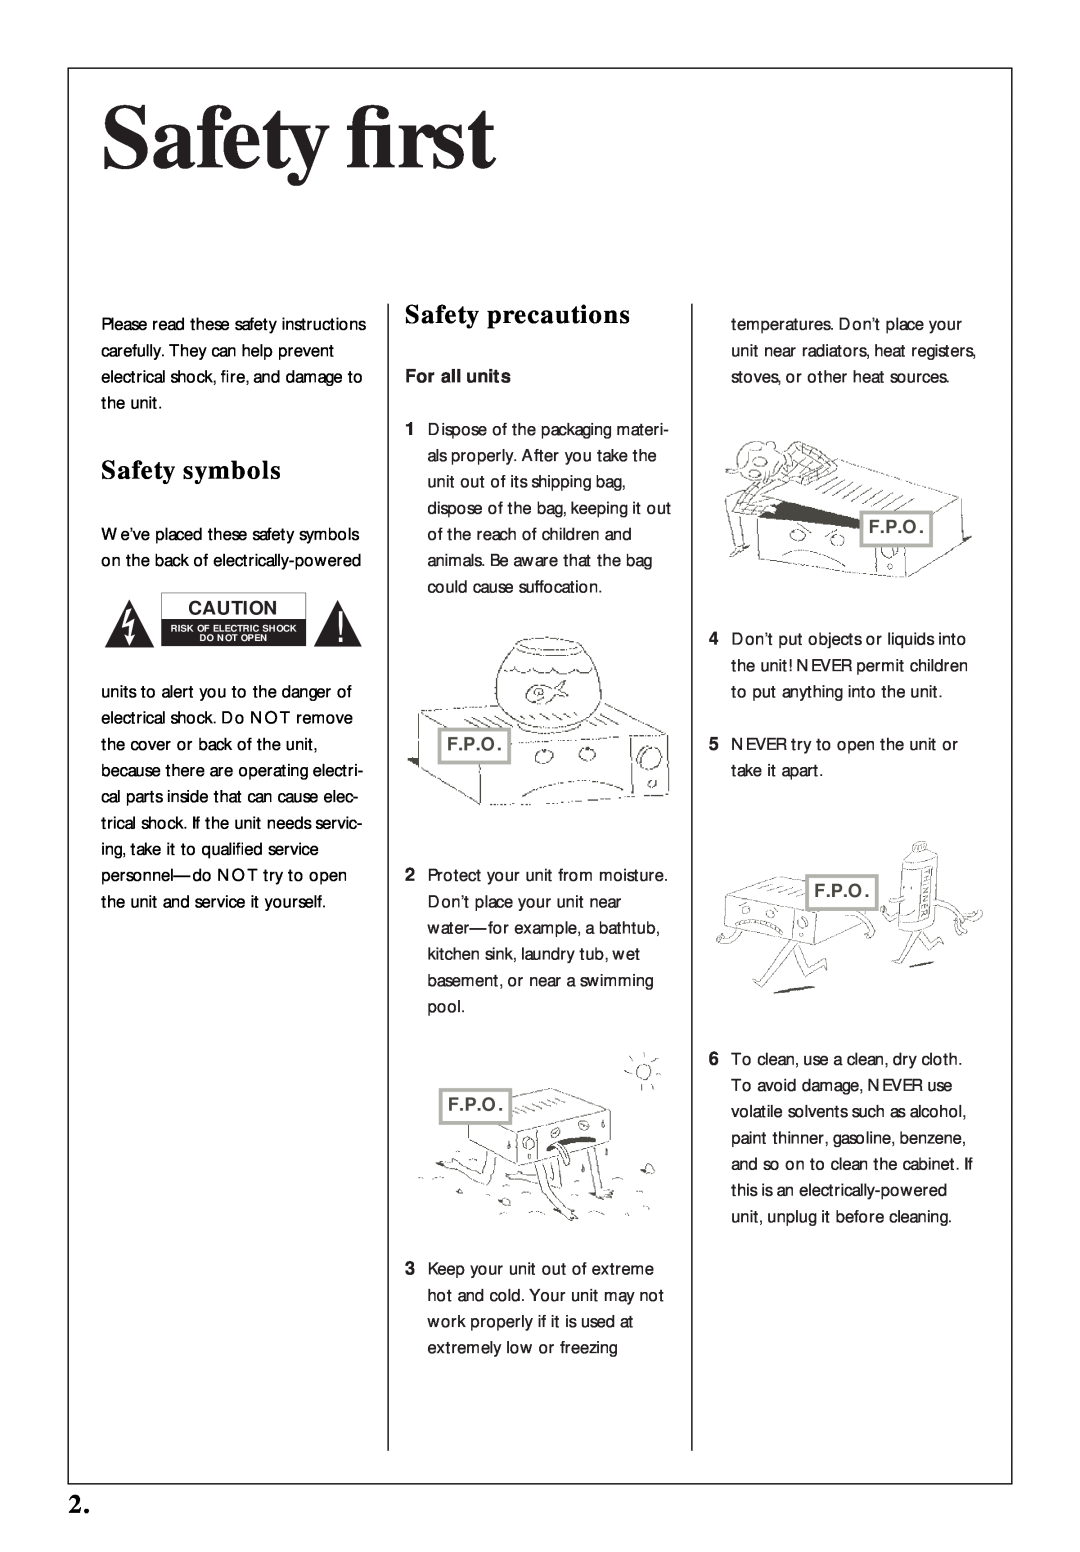 Kenwood KSS-500 owner manual Safety ﬁrst, Safety symbols, Safety precautions, For all units, F.P.O 